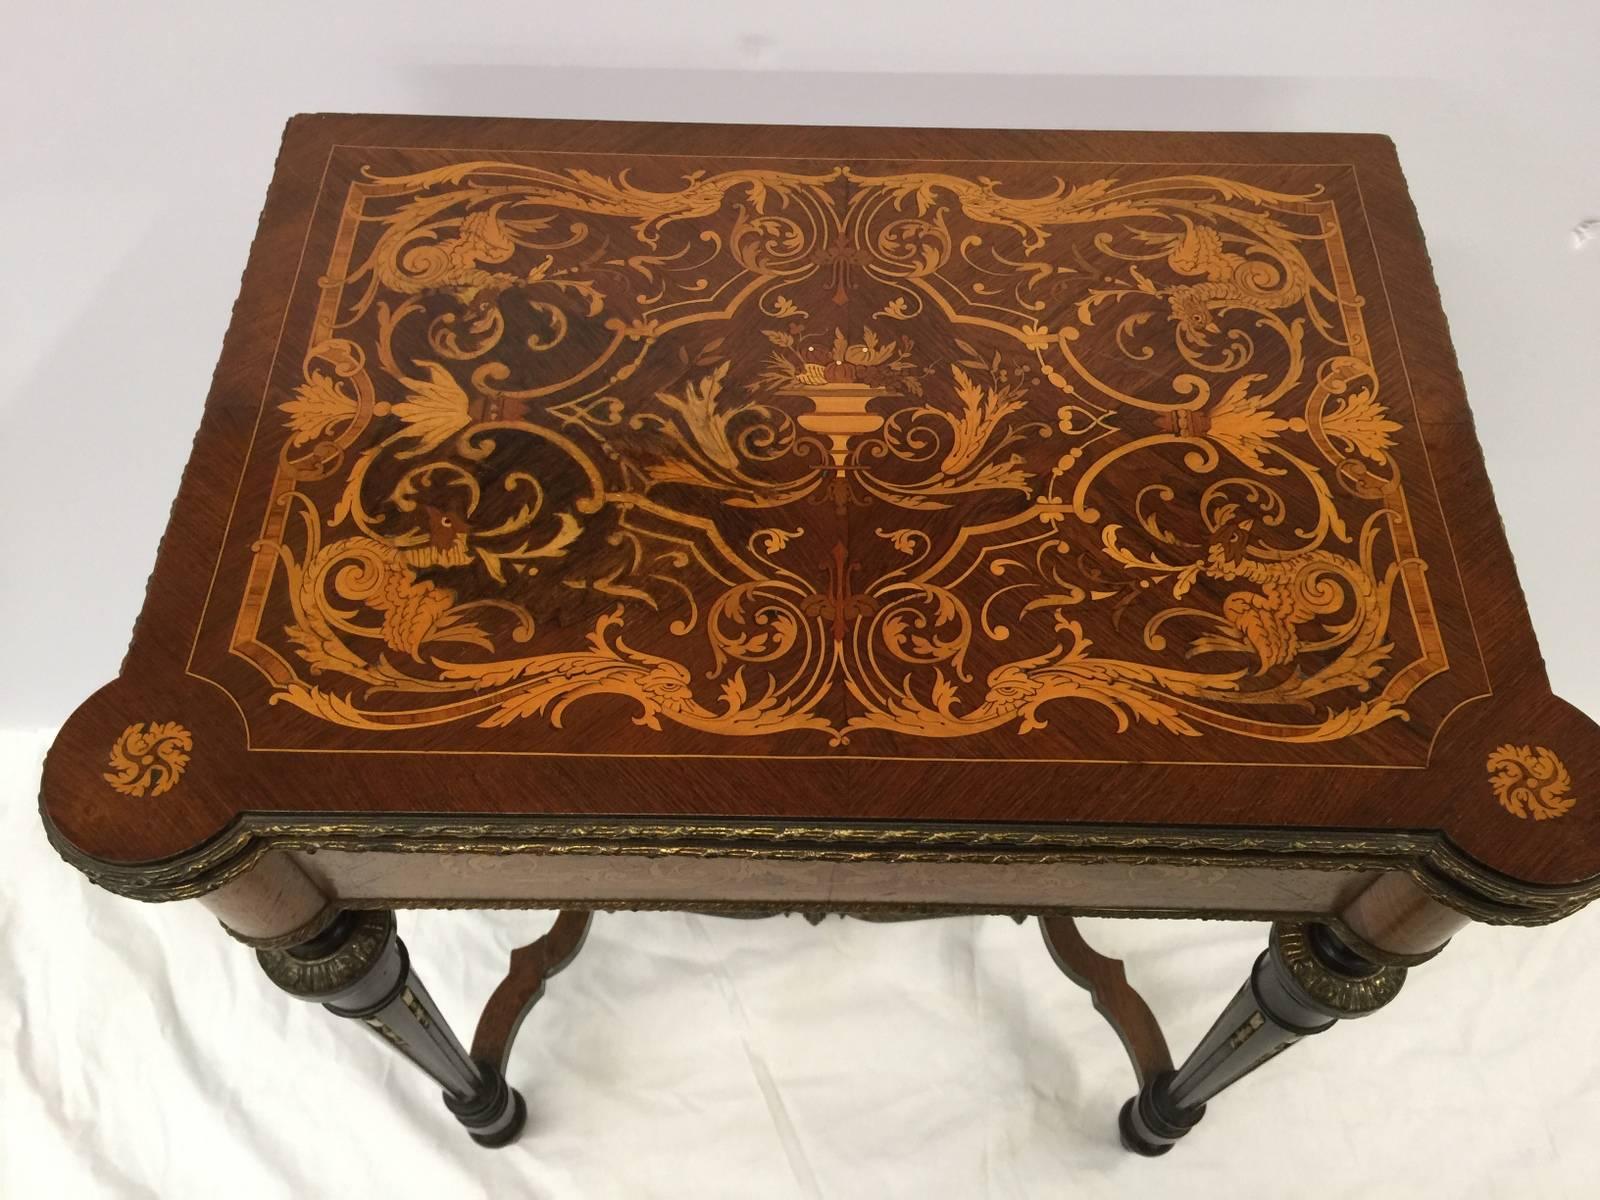 Gorgeous mahogany inlaid flip-top console card table with elaborate satinwood inlay. Hand-carved tapered legs with stretcher base with ormolu mounts. The black leather top is in very clean condition with minimal signs or use.